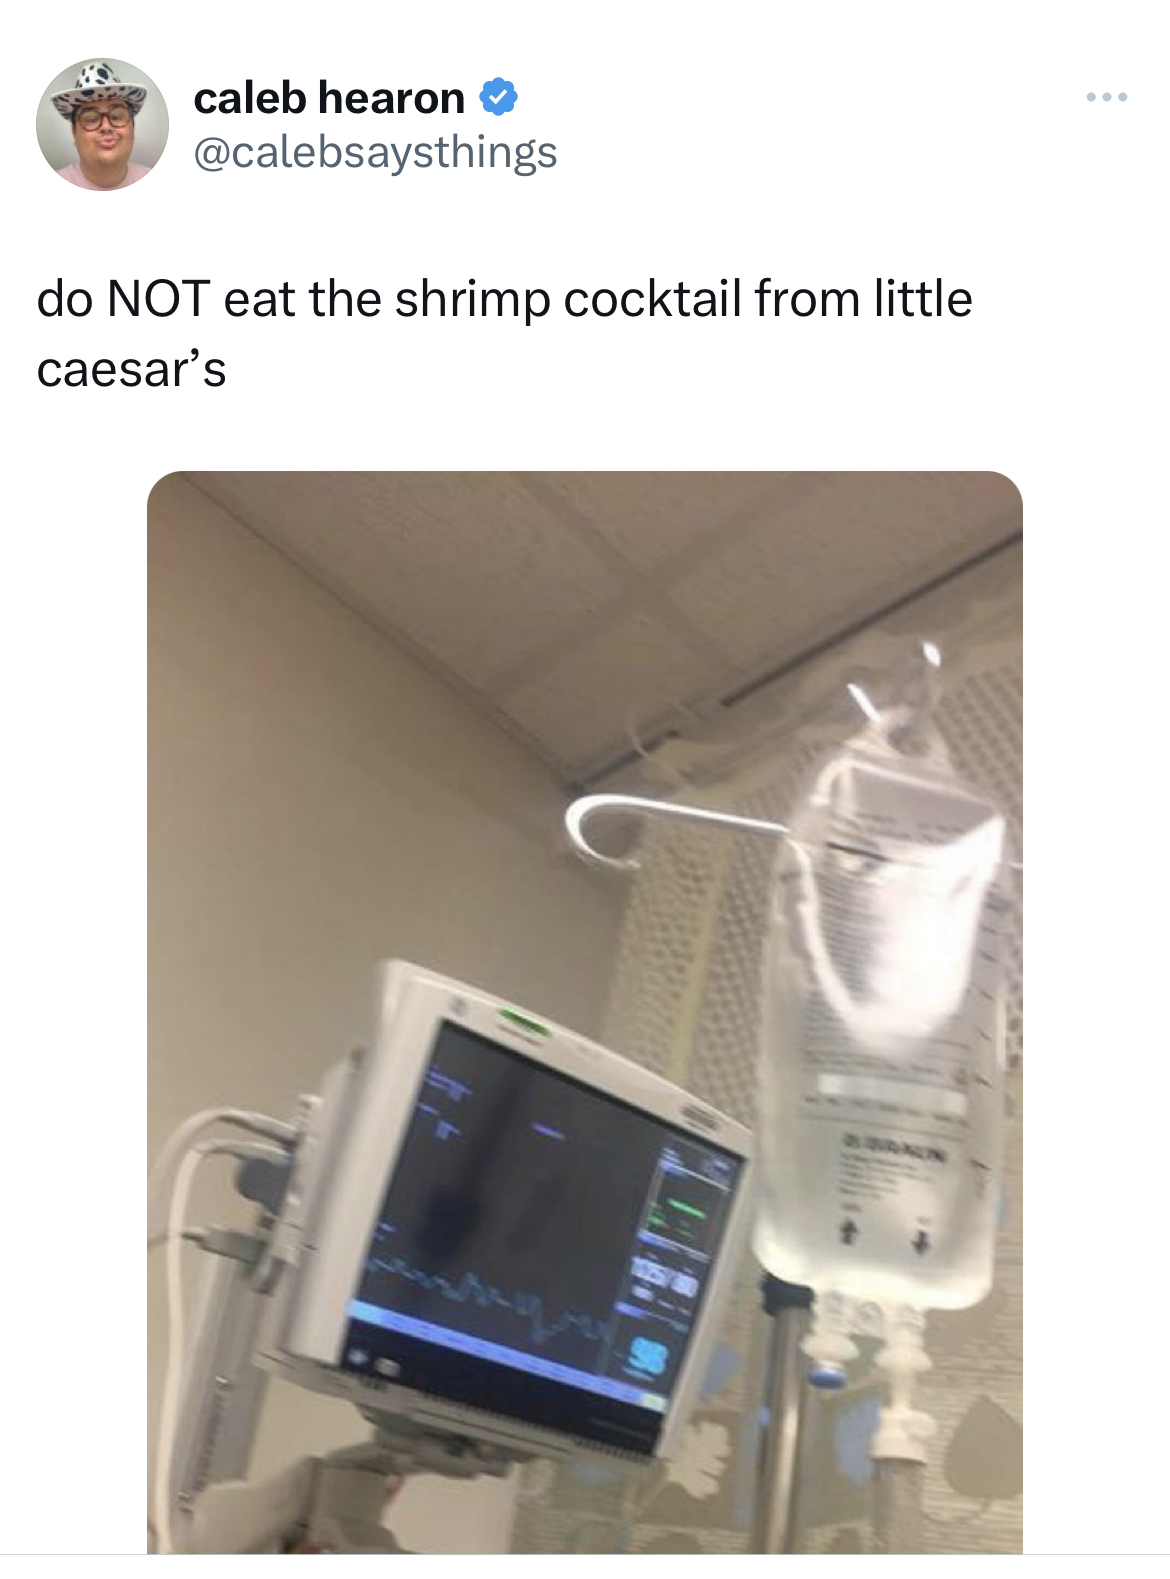 Unhinged Tweets - don t drink the mastercard mouse water - caleb hearon do Not eat the shrimp cocktail from little caesar's